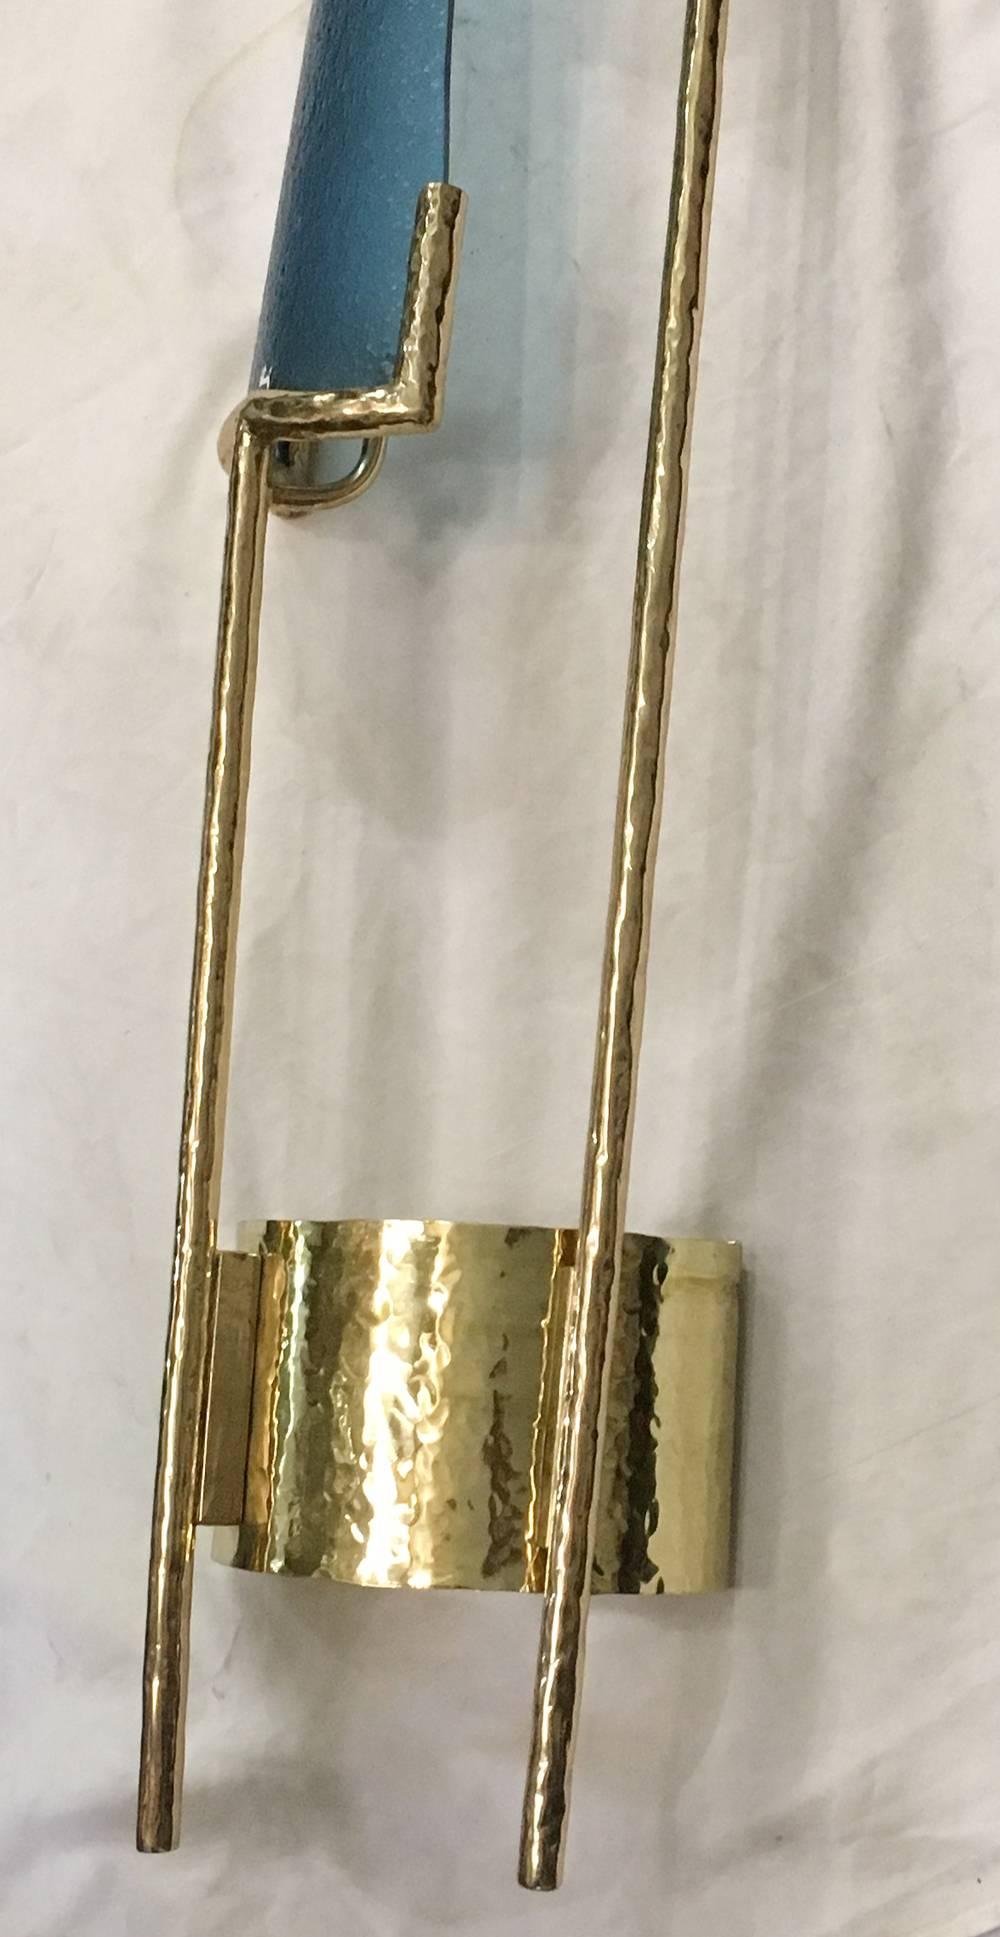 Pair of 1960s Italian polished bronze sconces with gilt finish and with large blue glass insets. Two lights each sconce.

Measurements:
58" height
9.5" length
5" depth.